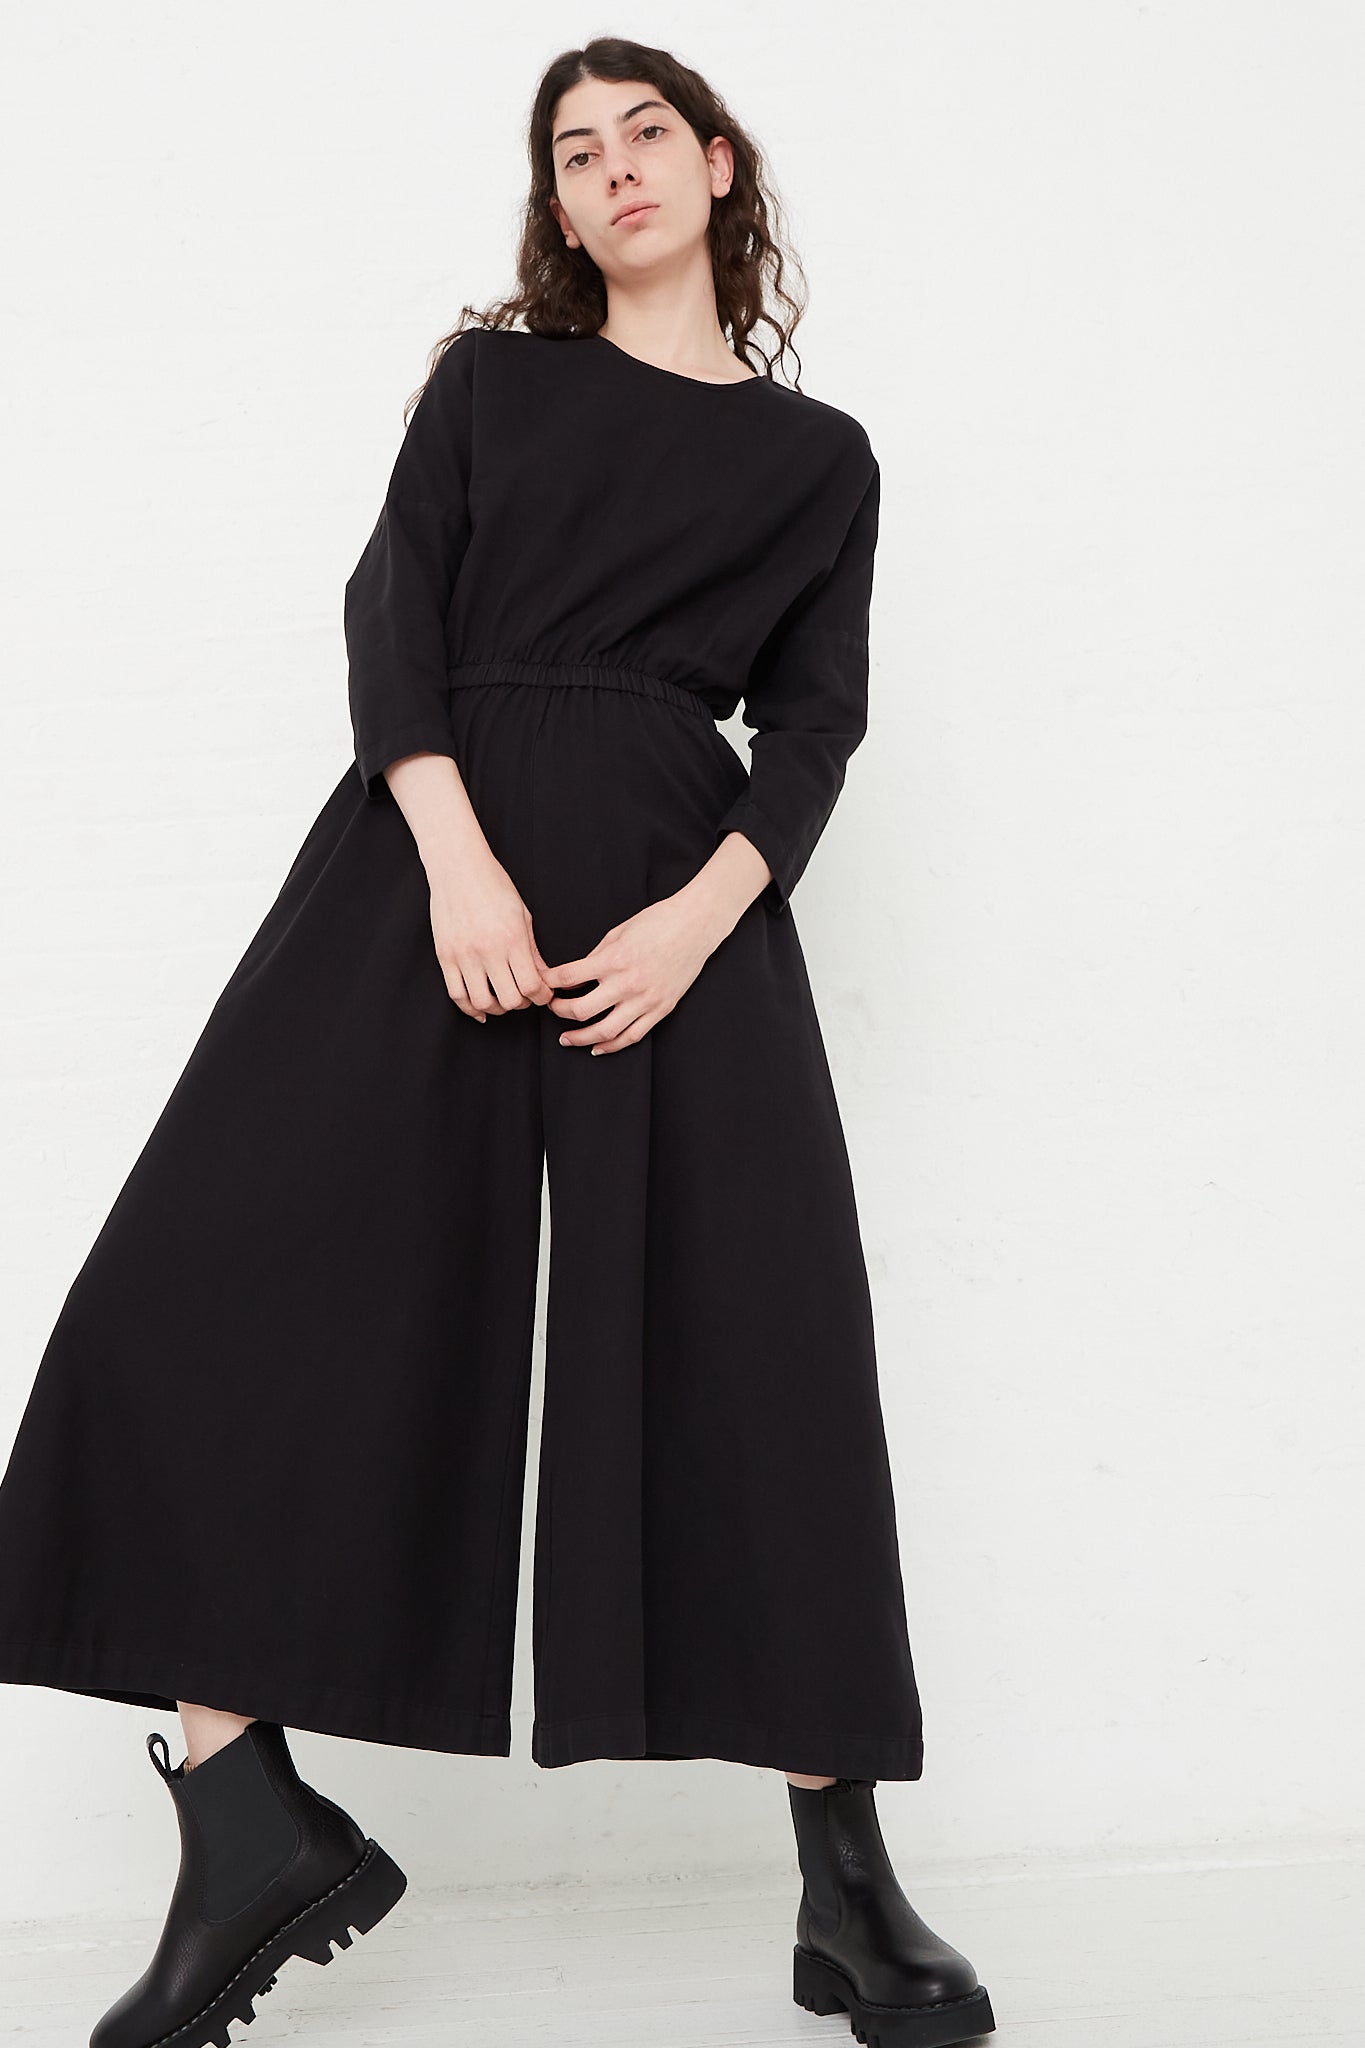 Cotton Twill Wide Culotte Jumpsuit in Black by Black Crane for Oroboro Front